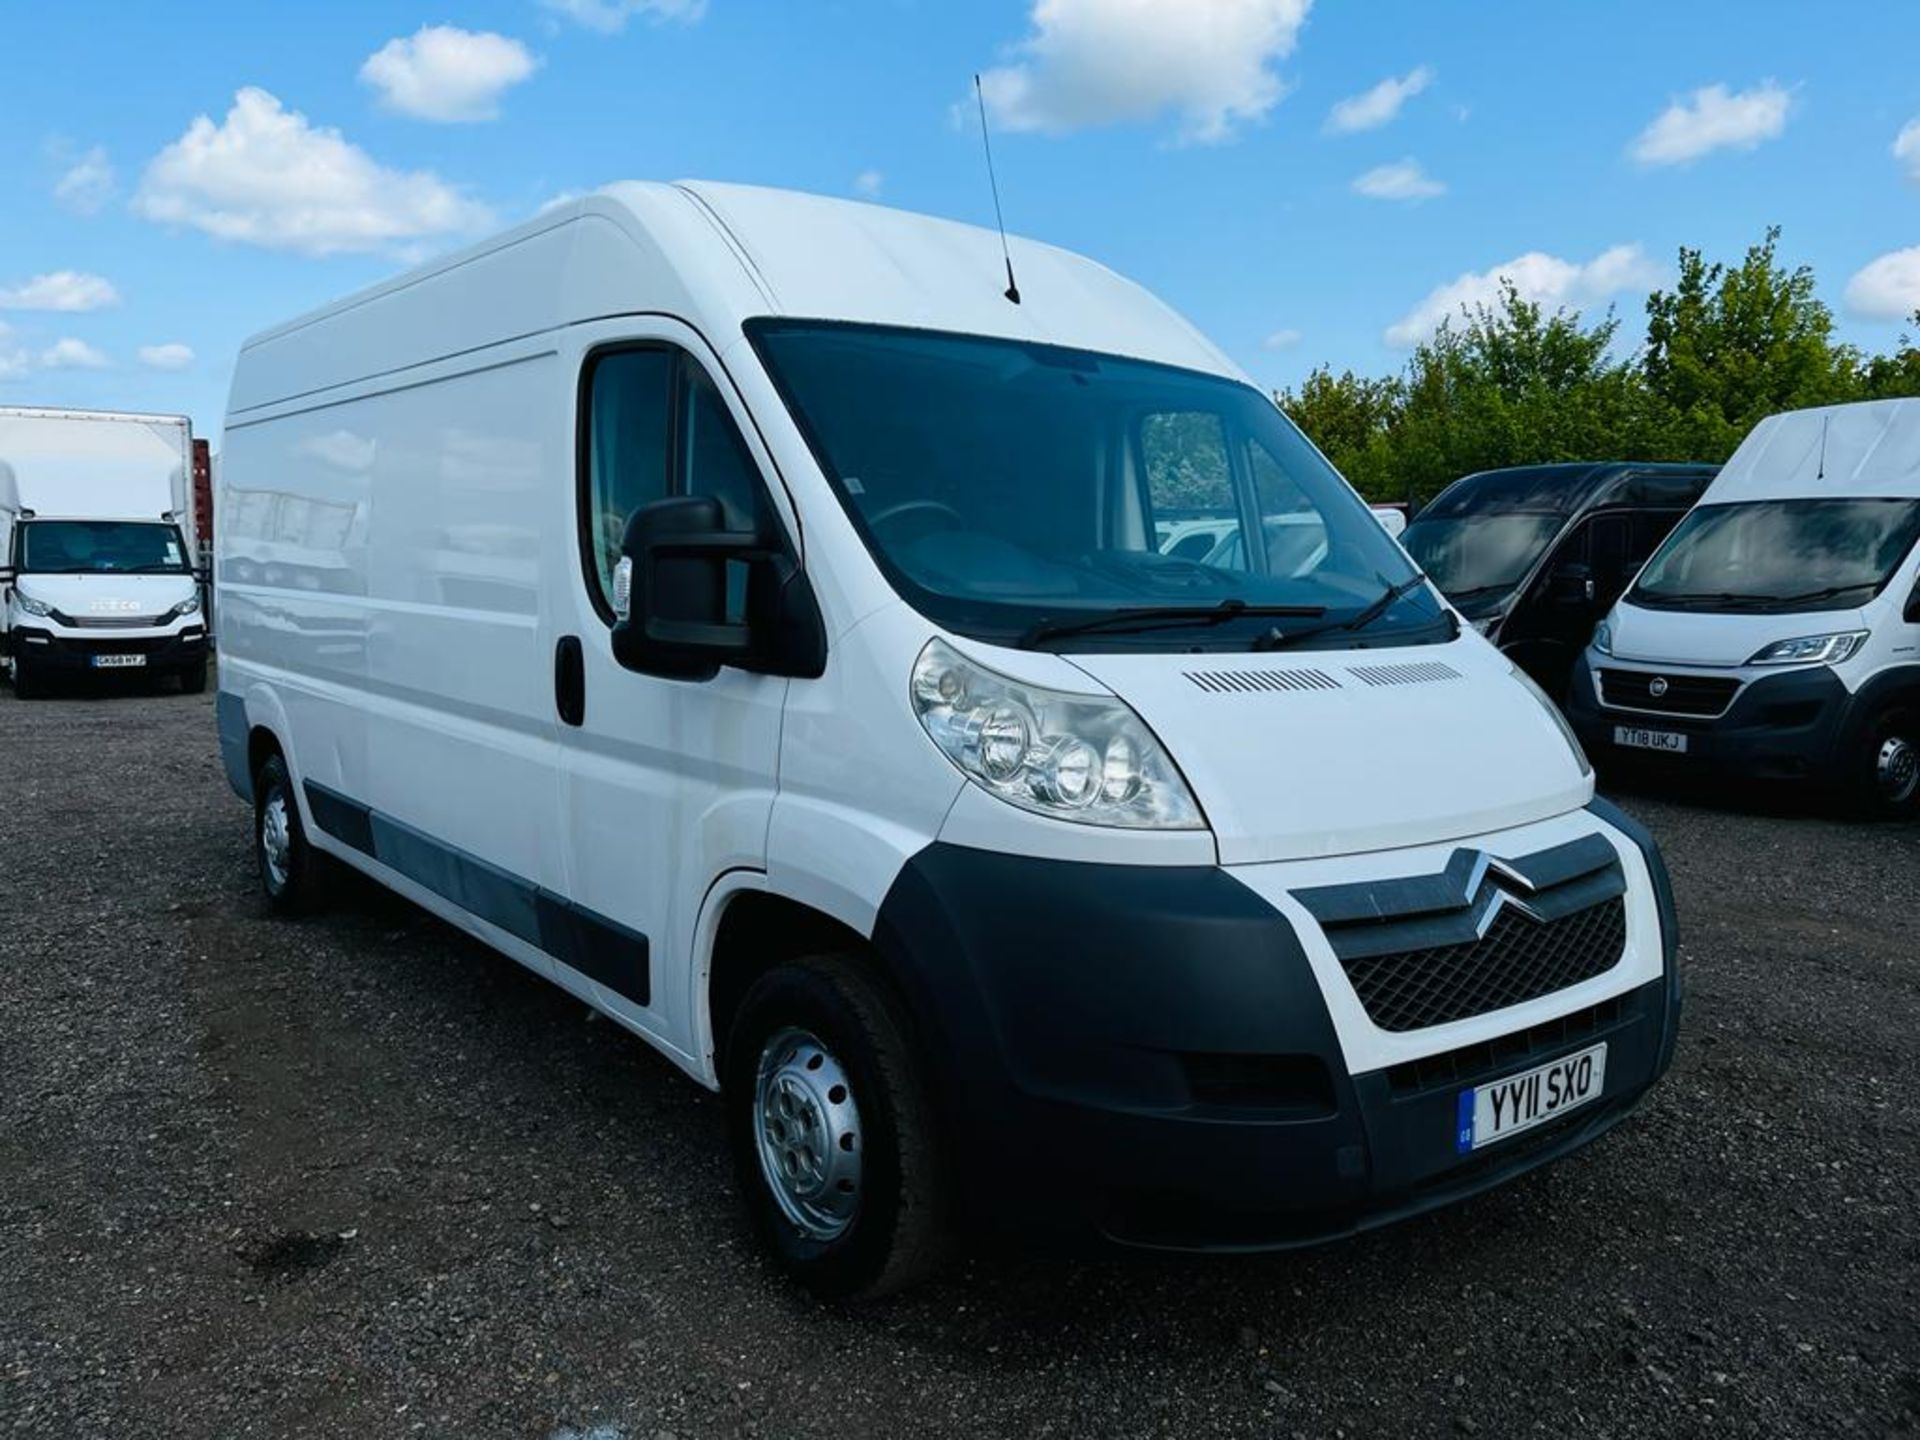 ** ON SALE ** Citreon Relay 2.2 HDI 35 120 L3 H2 2011 '11 Reg' - Panel Van - Only 89,374 Miles - Image 10 of 23